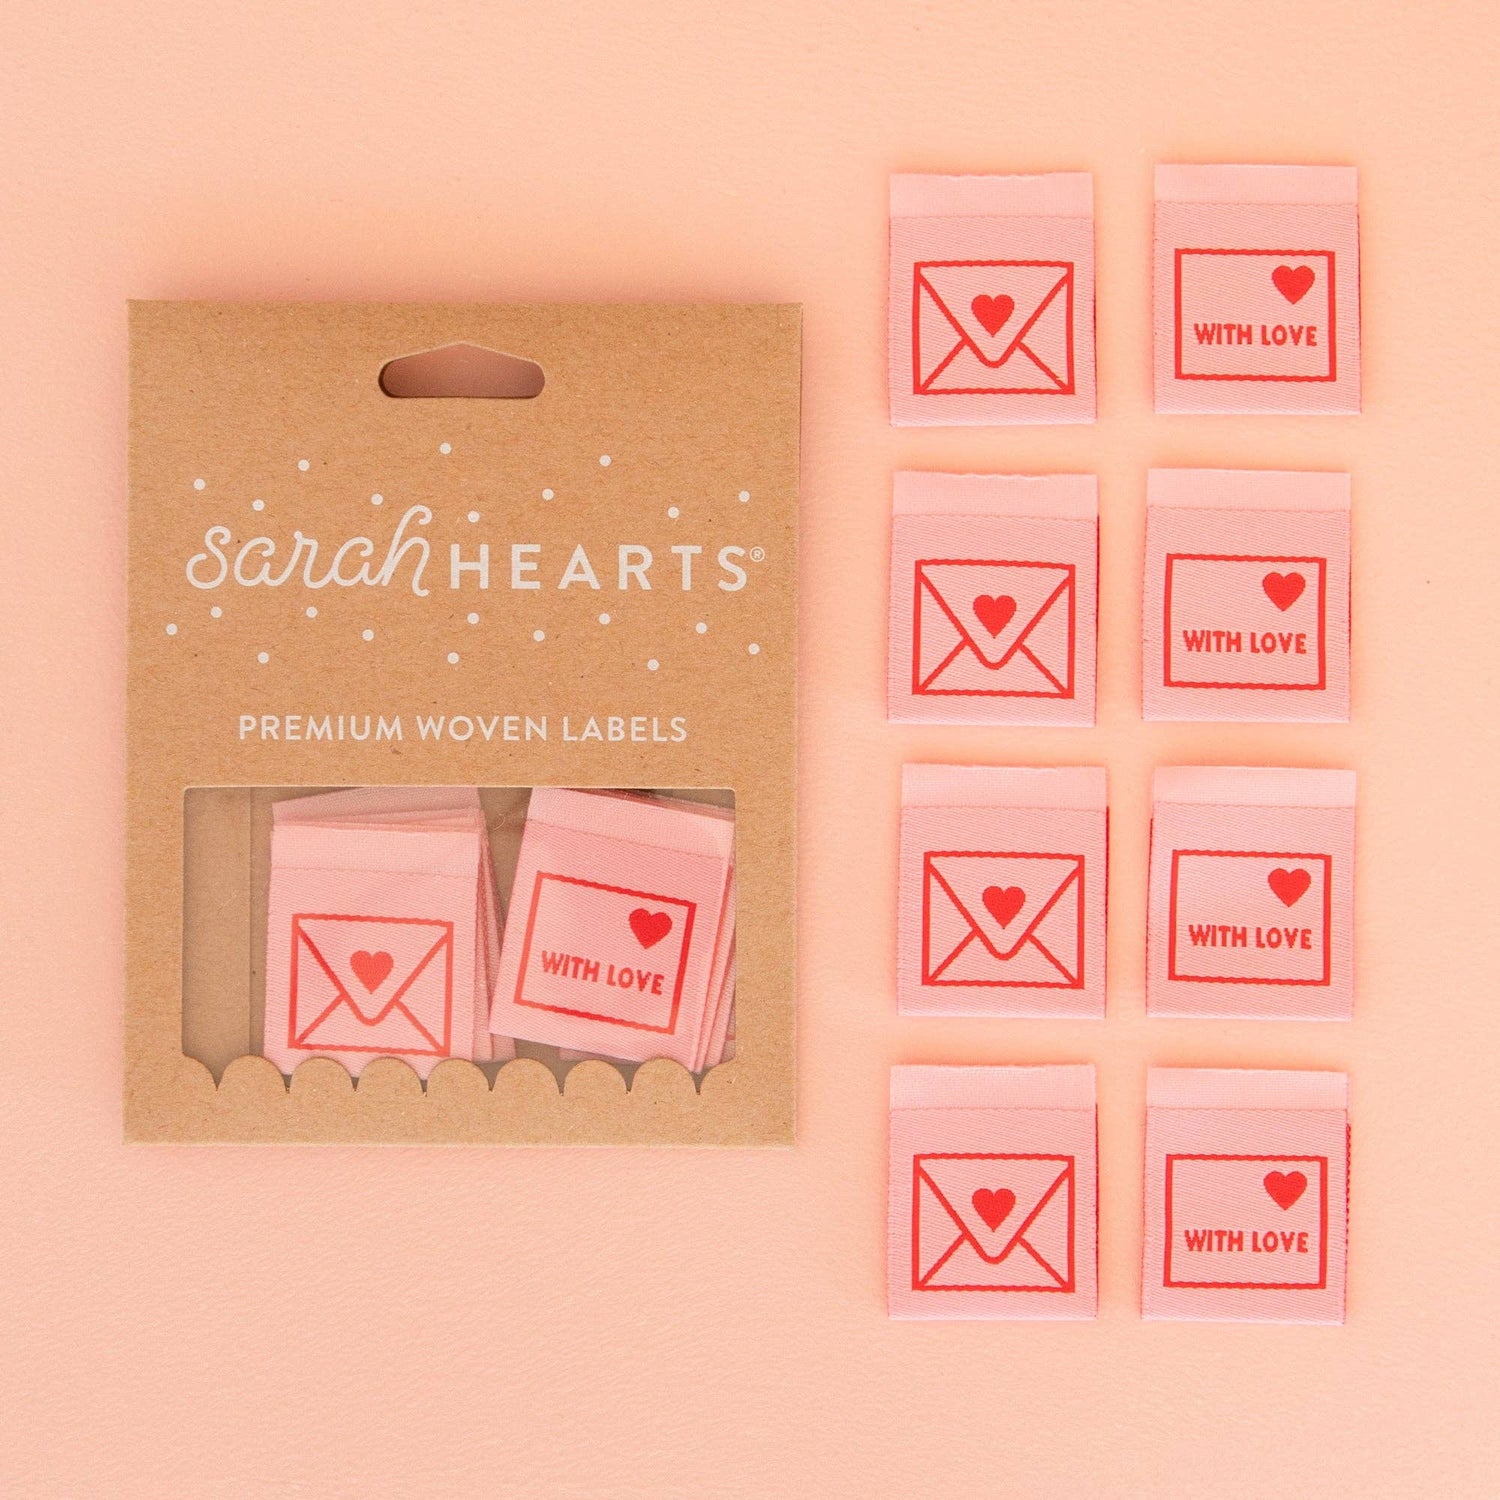 With Love Envelope  - Sarah Hearts - Sewing Labels